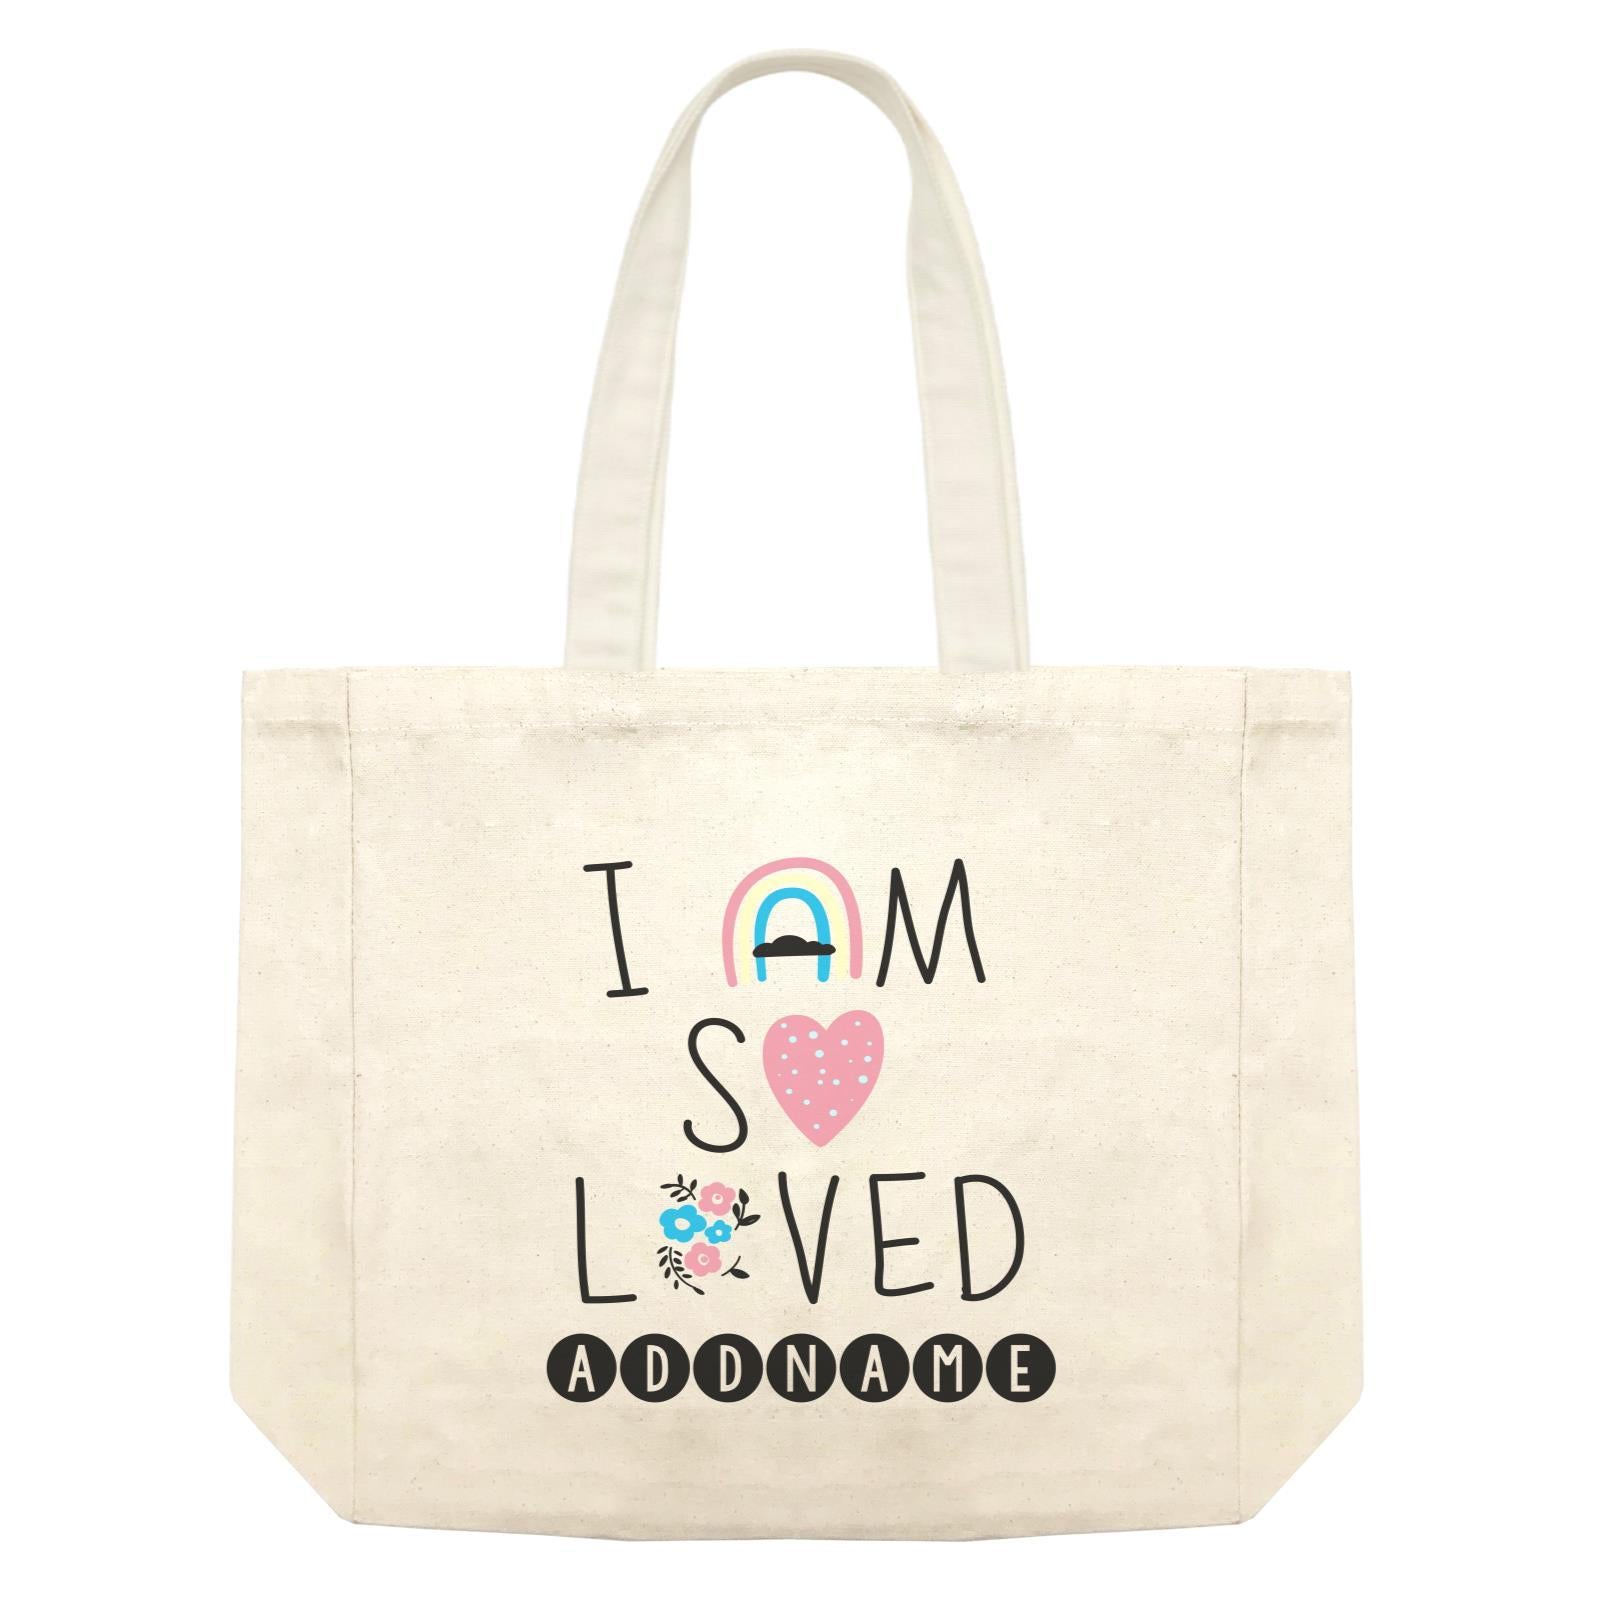 Children's Day Gift Series I Am So Loved Addname Shopping Bag